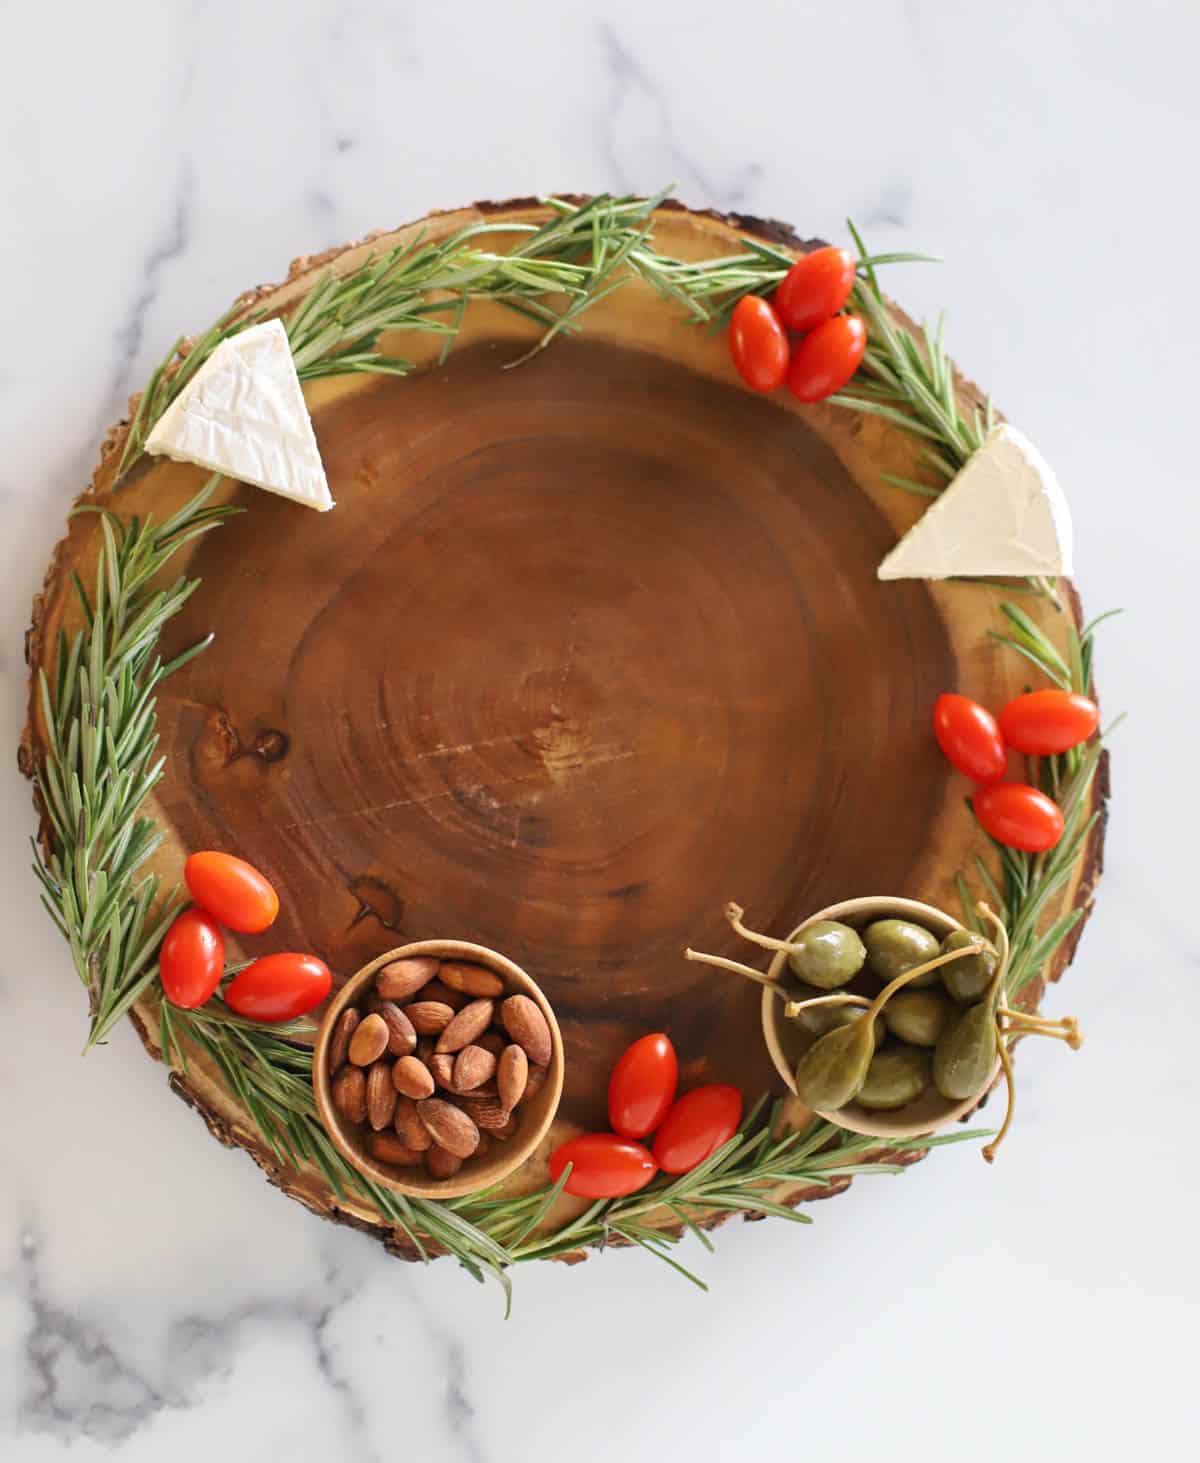 Round board trimmed with rosemary with cherry tomatoes, brie, caperberries, and almonds.